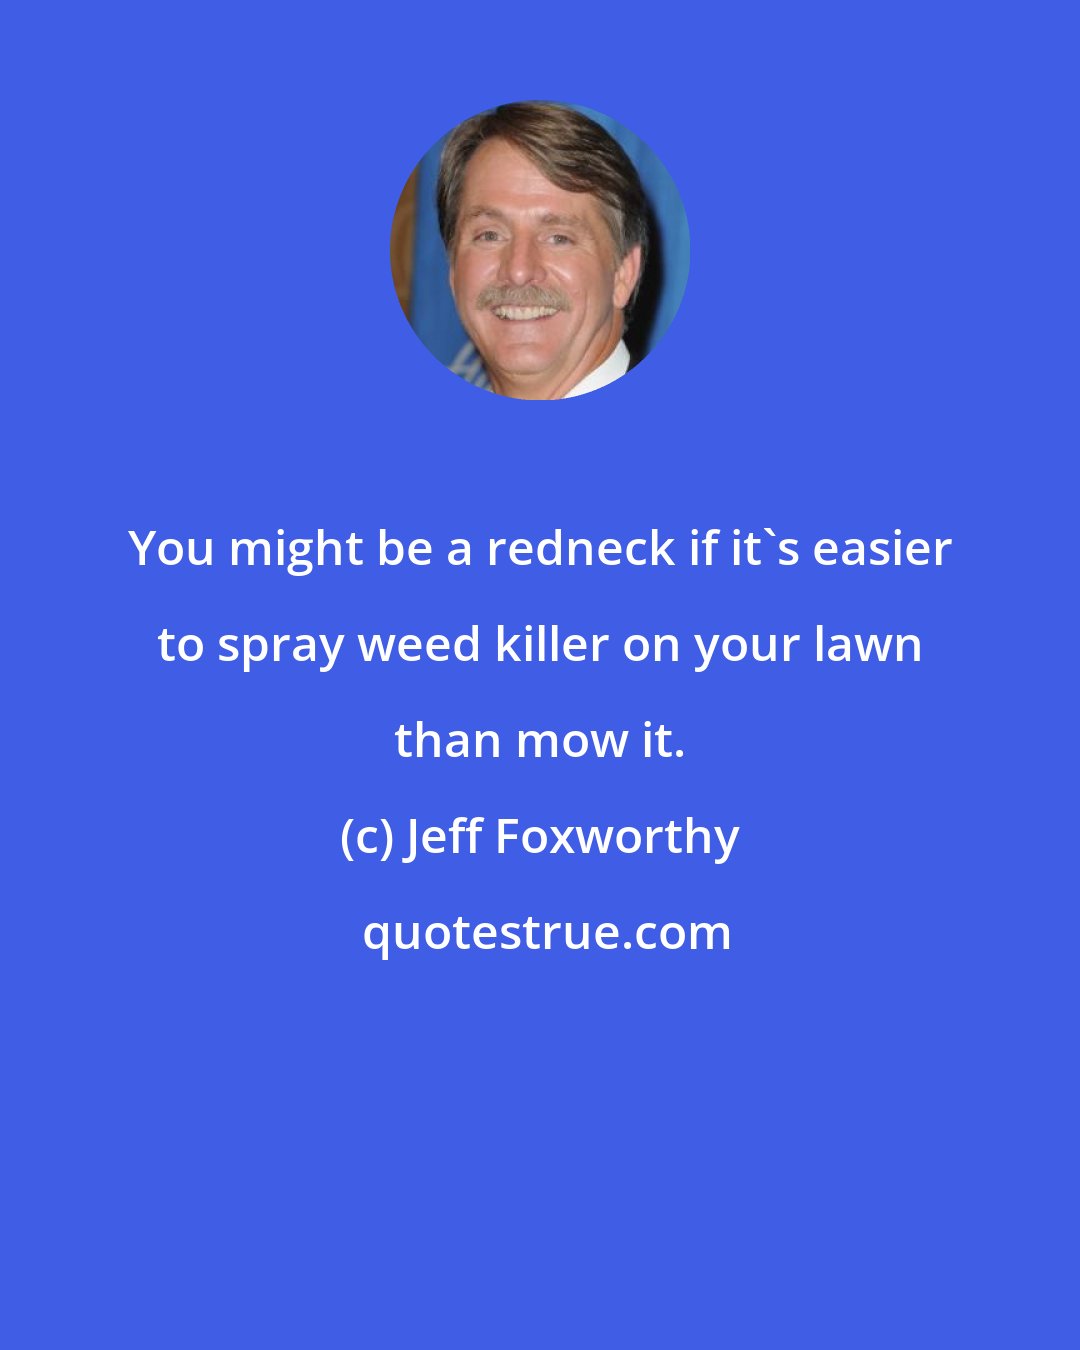 Jeff Foxworthy: You might be a redneck if it's easier to spray weed killer on your lawn than mow it.